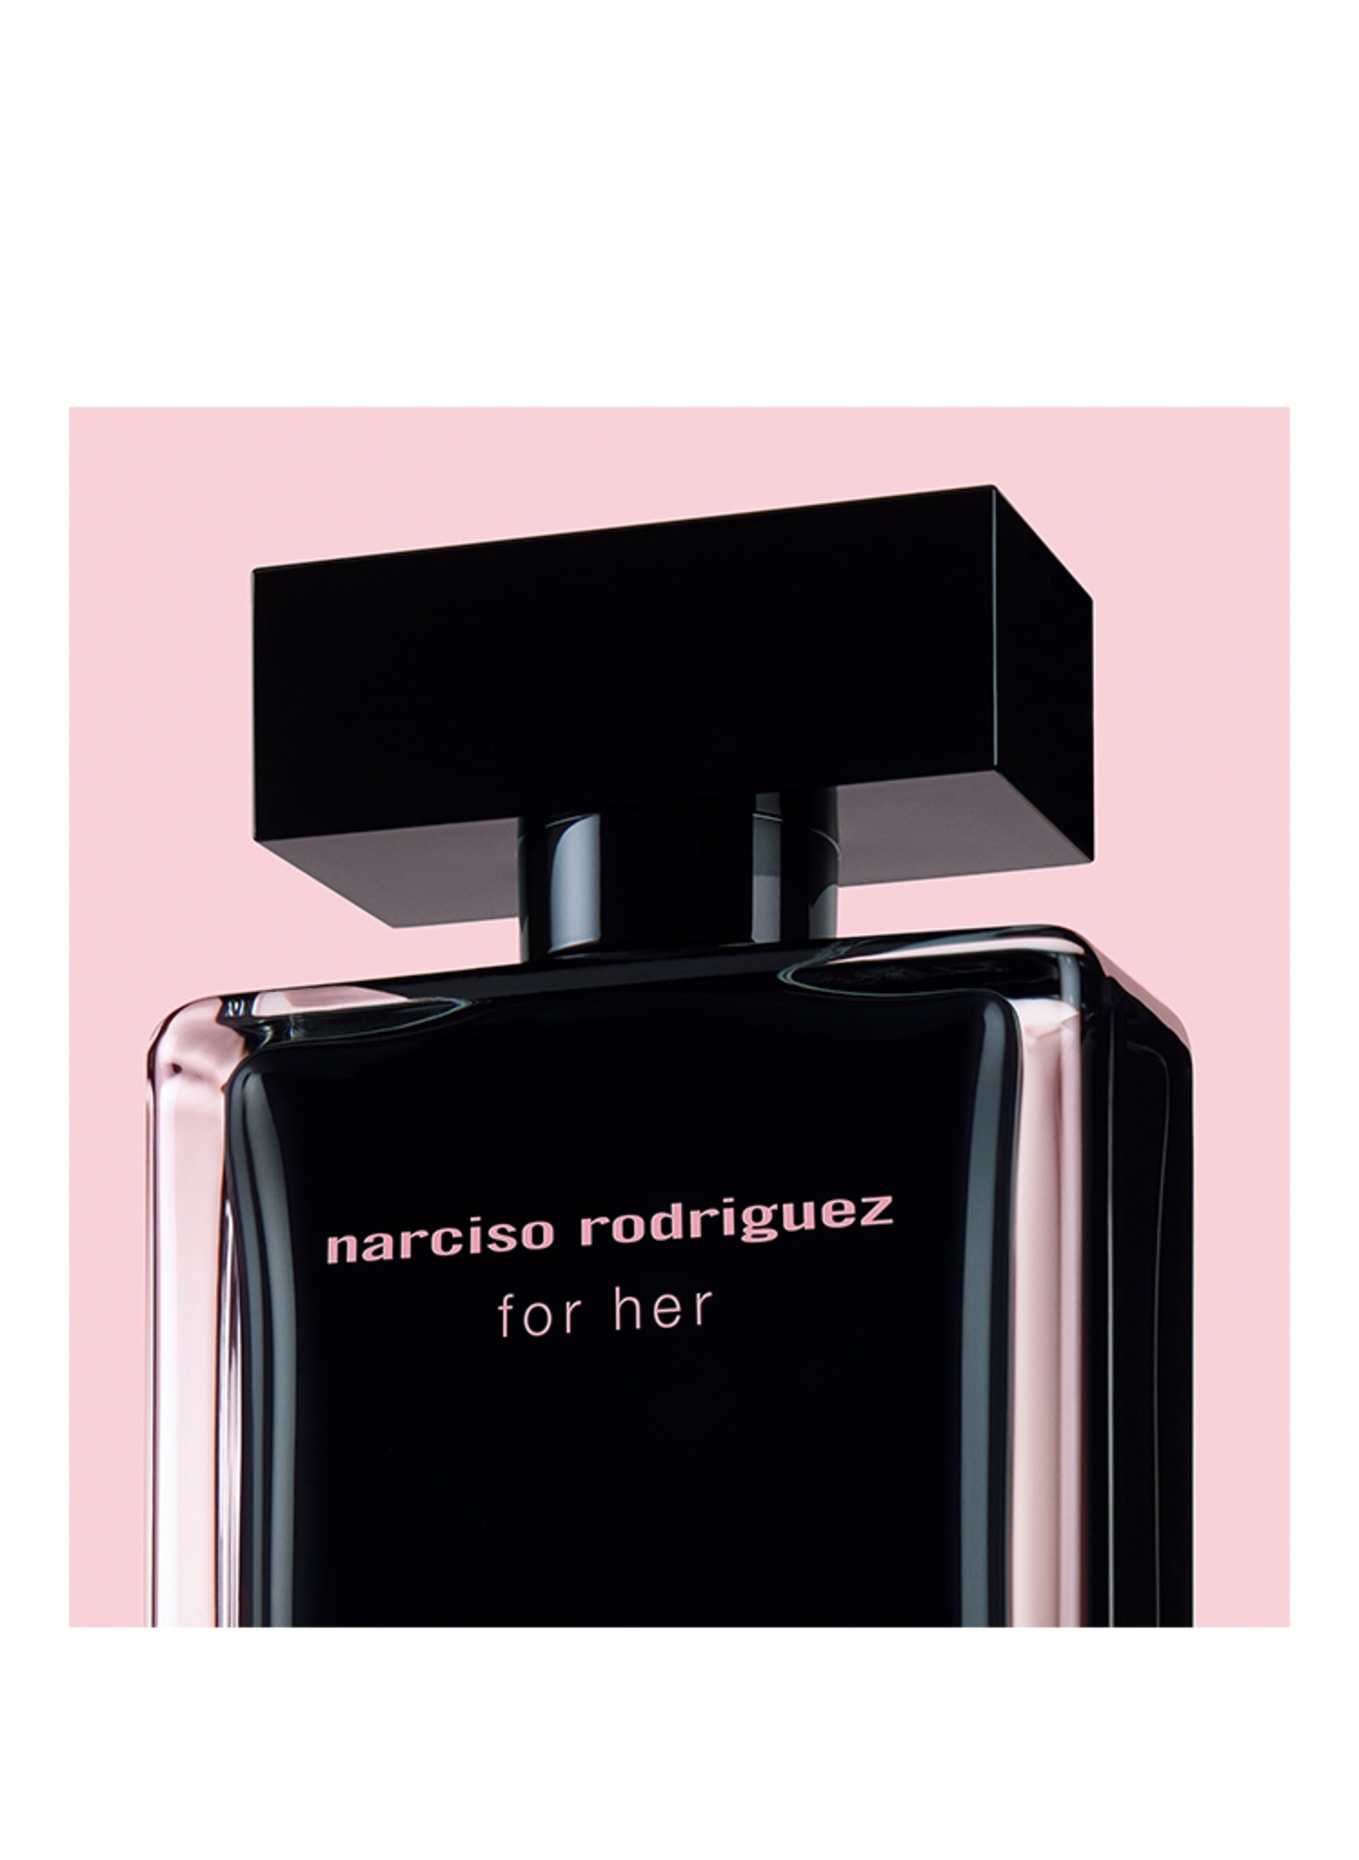 narciso rodriguez FOR HER (Obrázek 4)